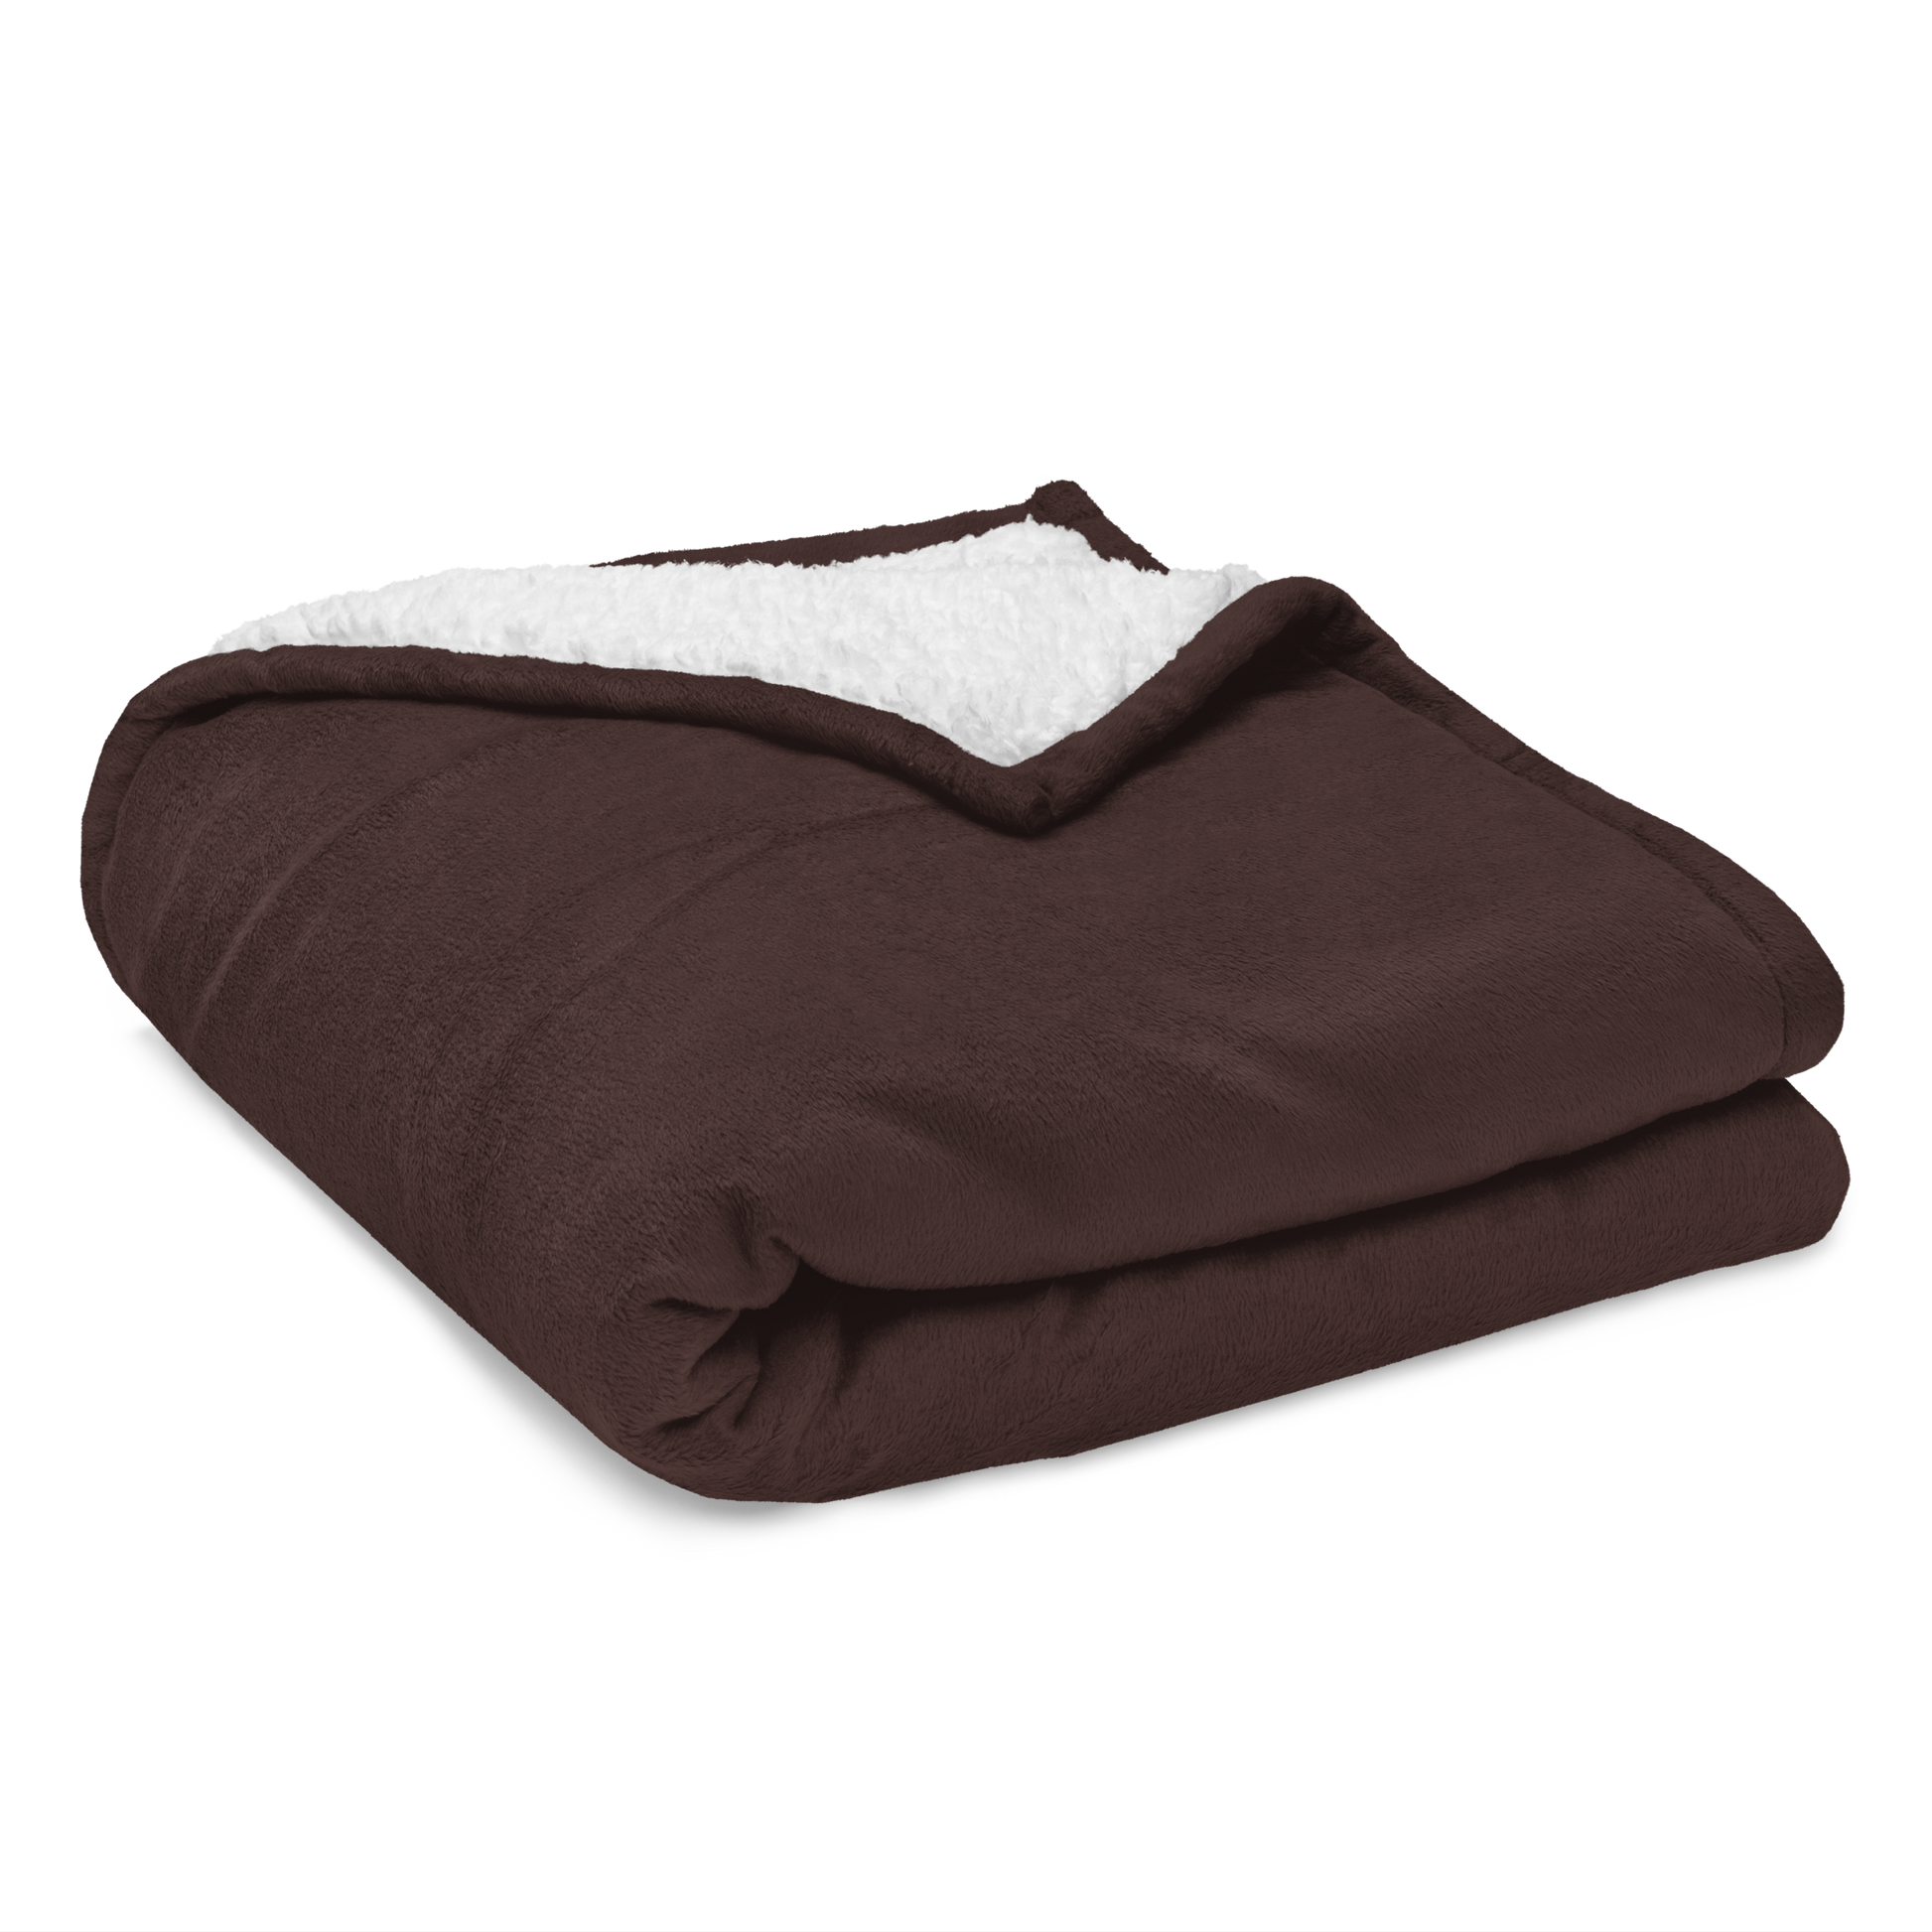 YHM Designs - YQR Regina Premium Sherpa Blanket - Crossed-X Design with Airport Code and Vintage Propliner - White Embroidery - Image 09